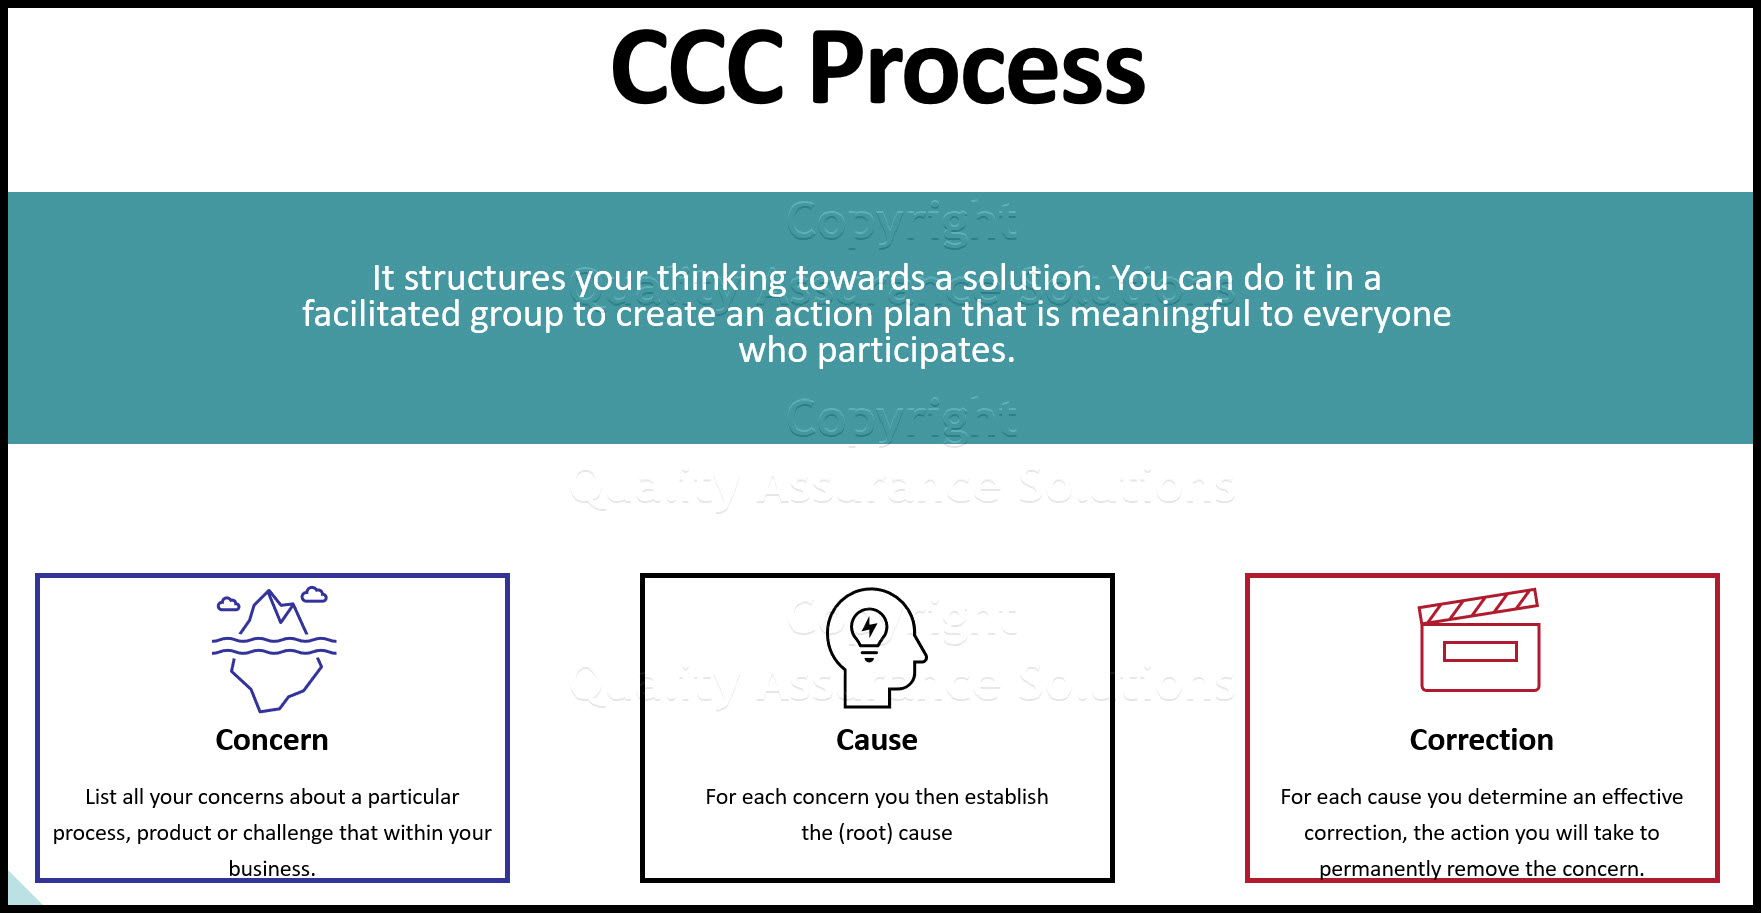 Do you know the CCC result method and defintion? Another great tool that drives continuous improvement within your company